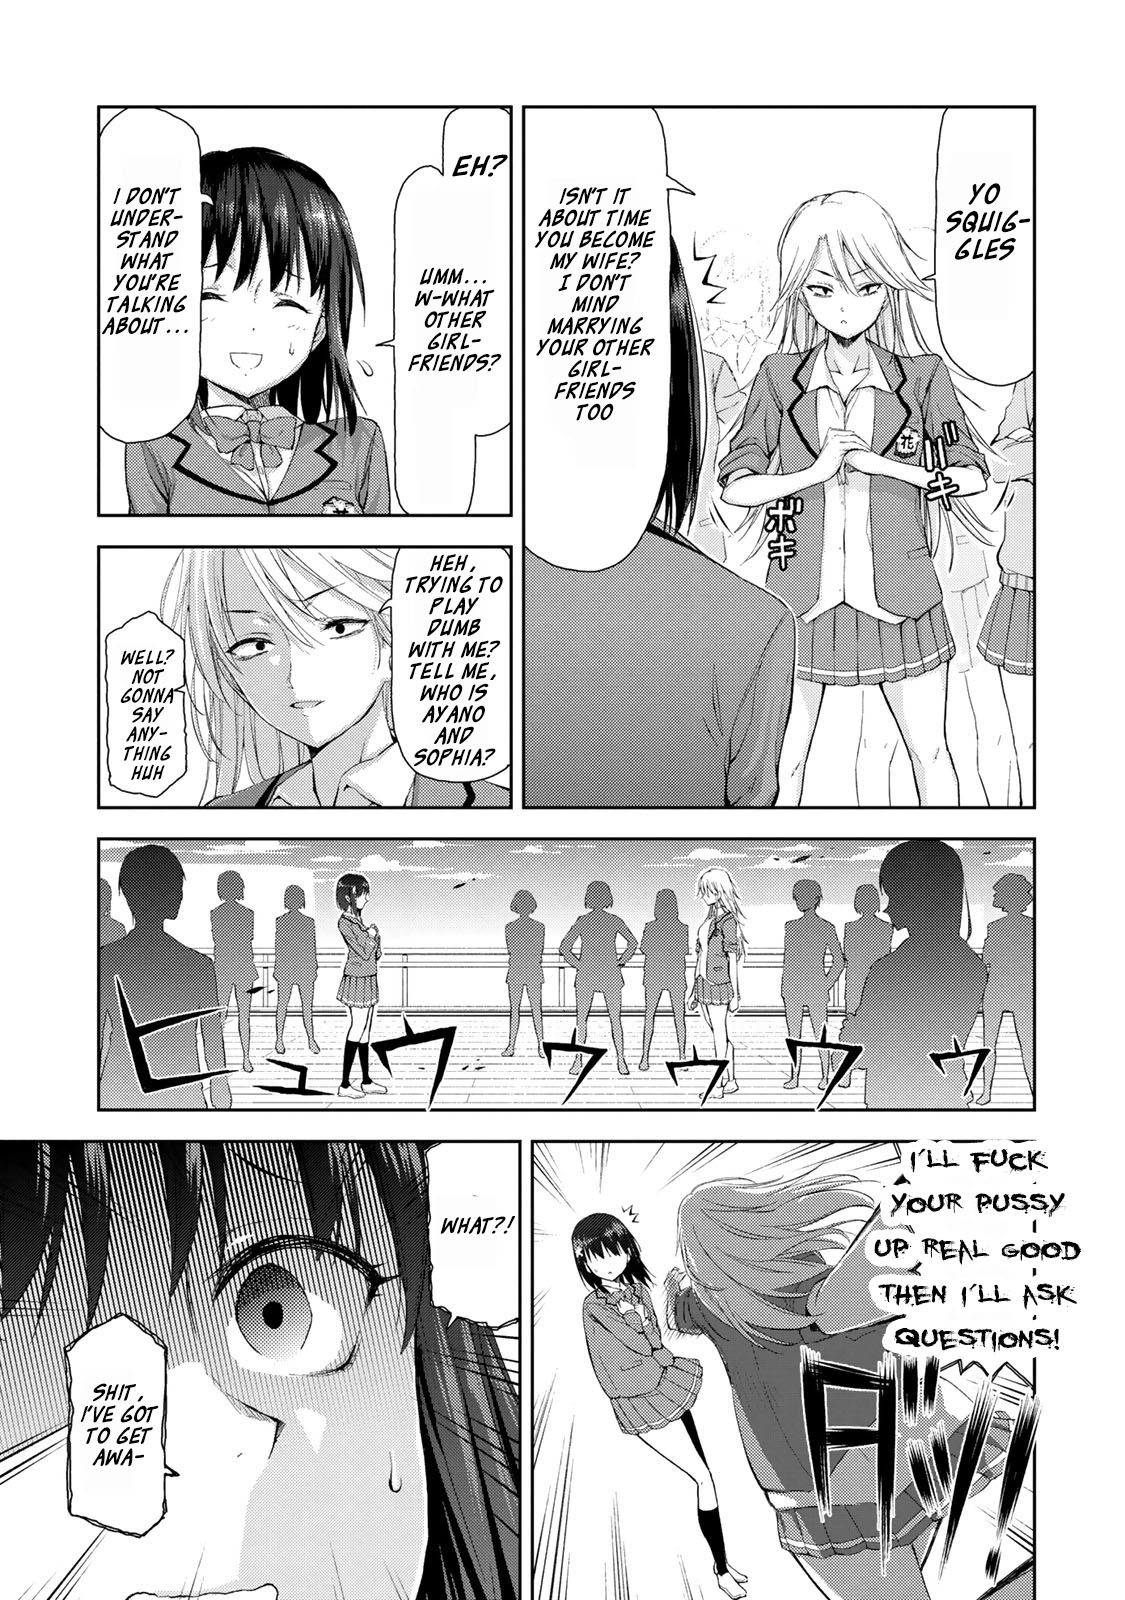 Hime no Dameshi Vol. 3 Ch. 23 Hime and Oden